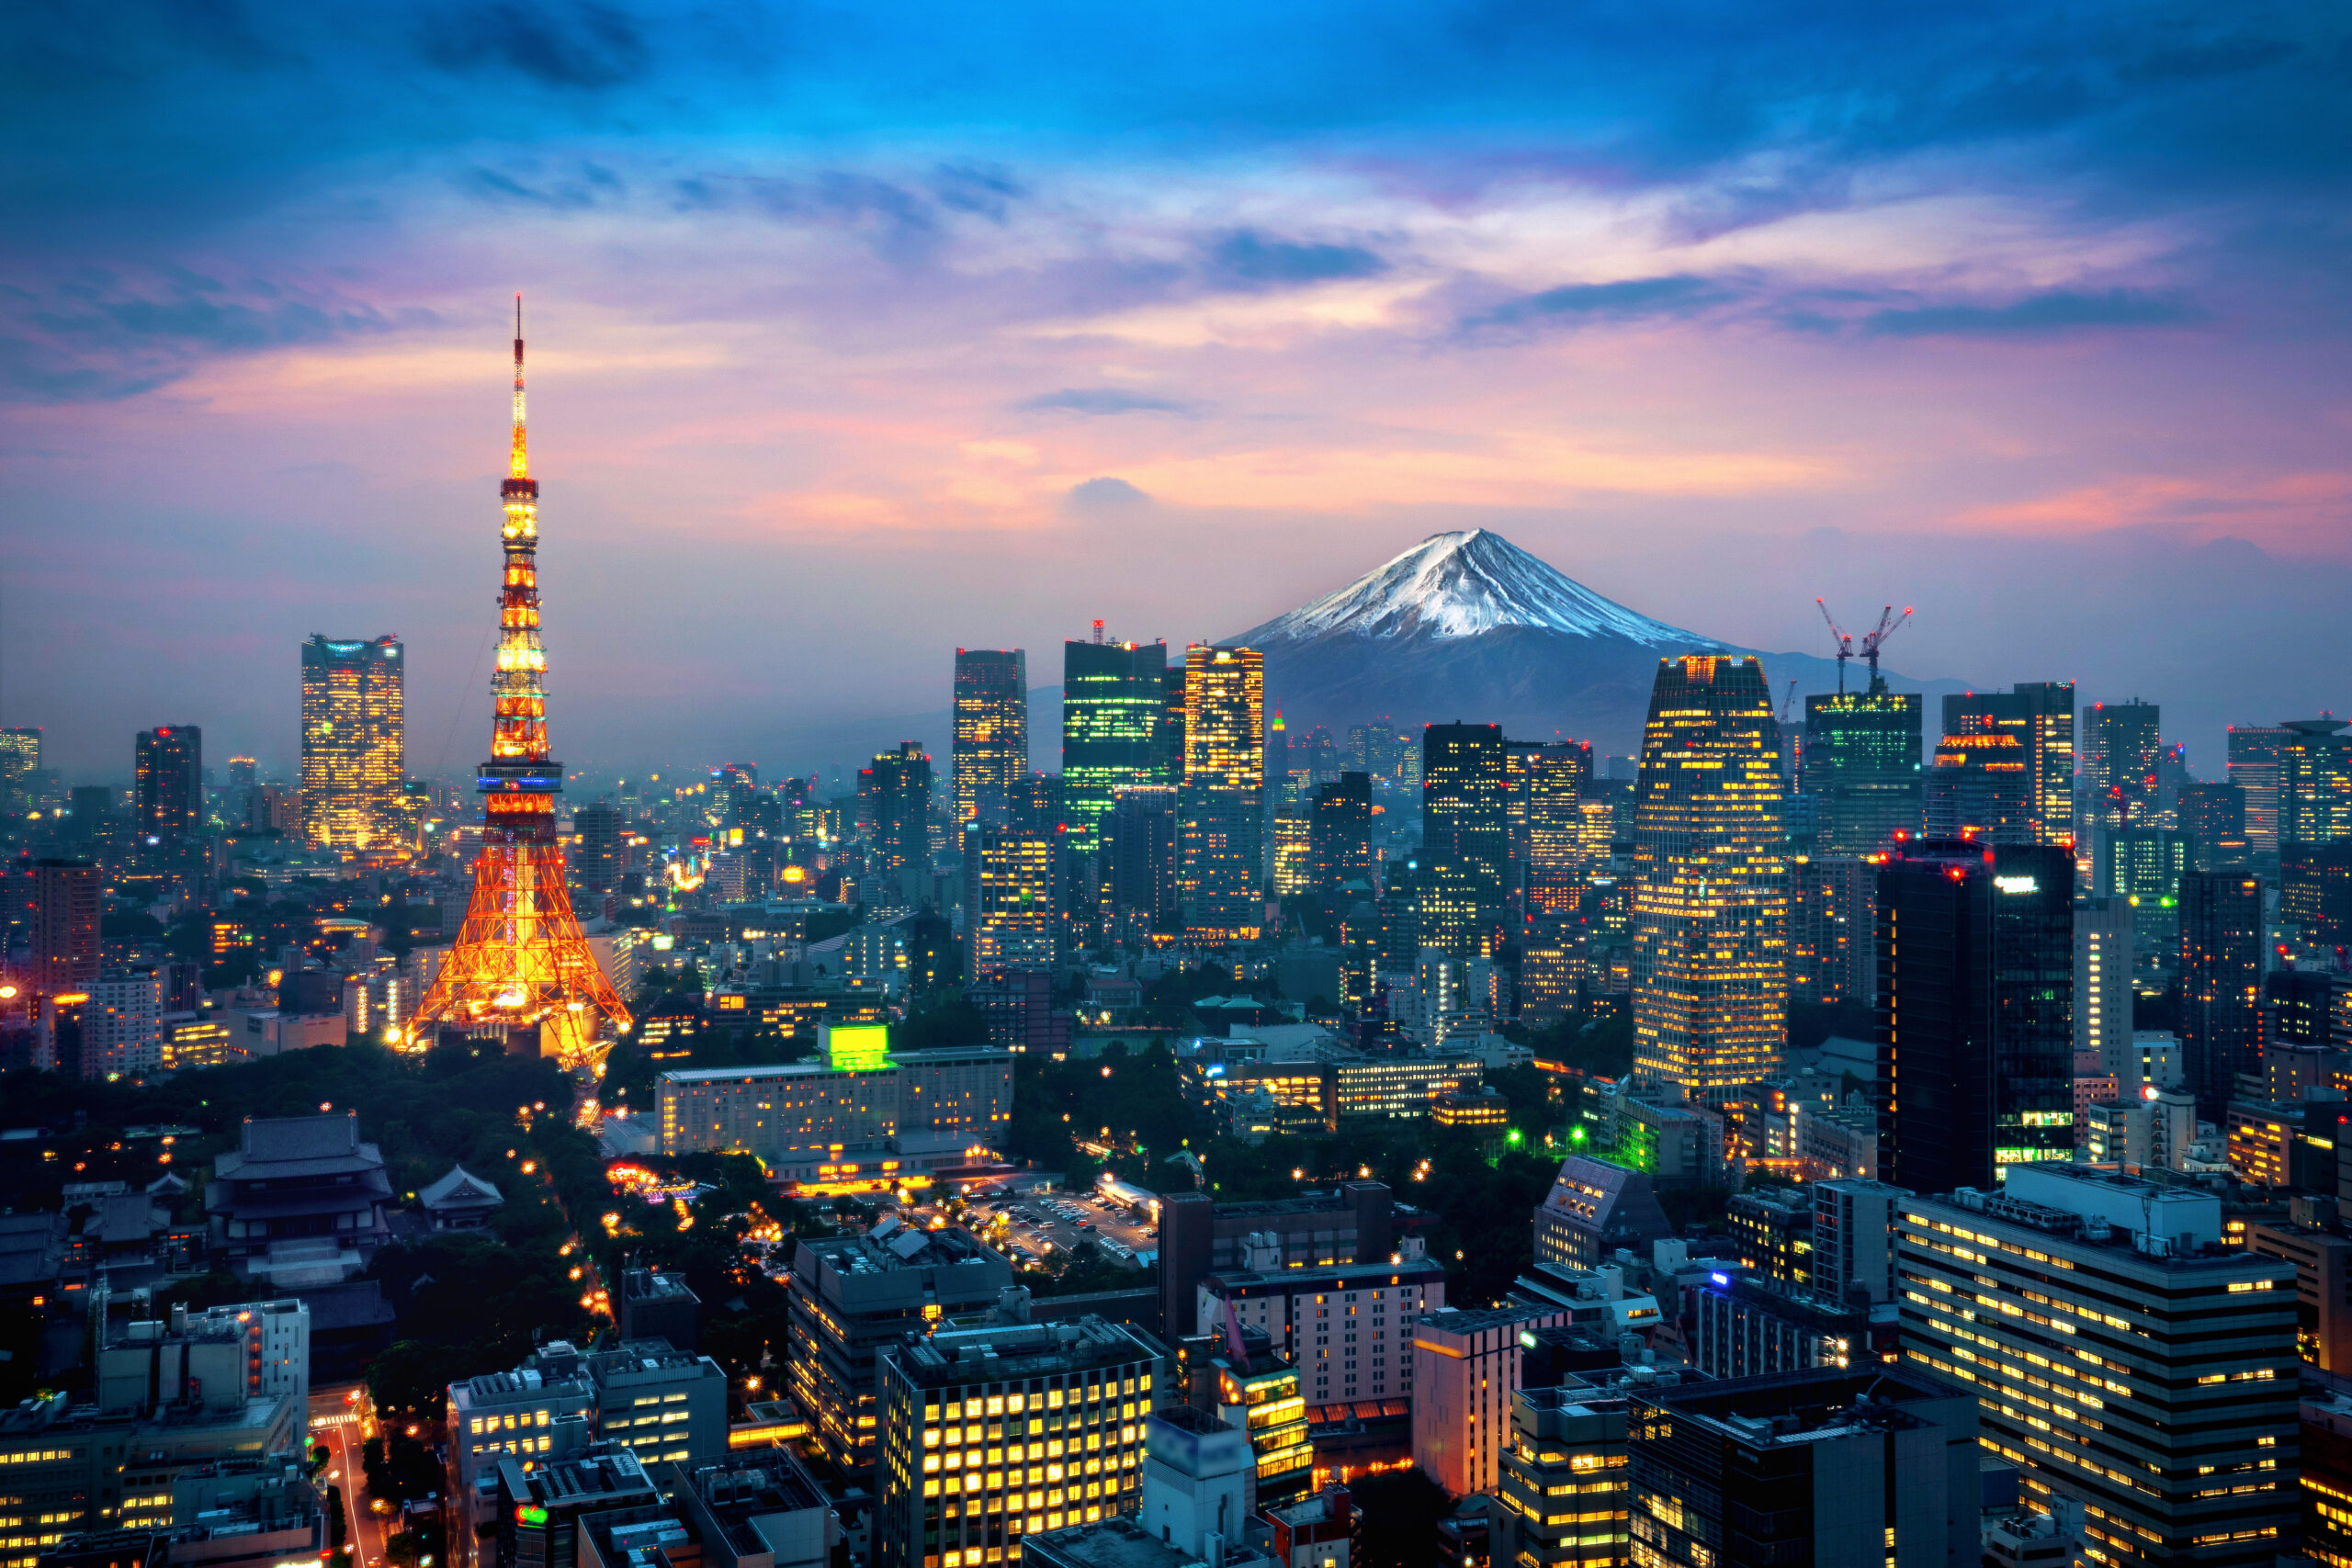 Aerial view of Tokyo cityscape with Fuji mountain in Japan.